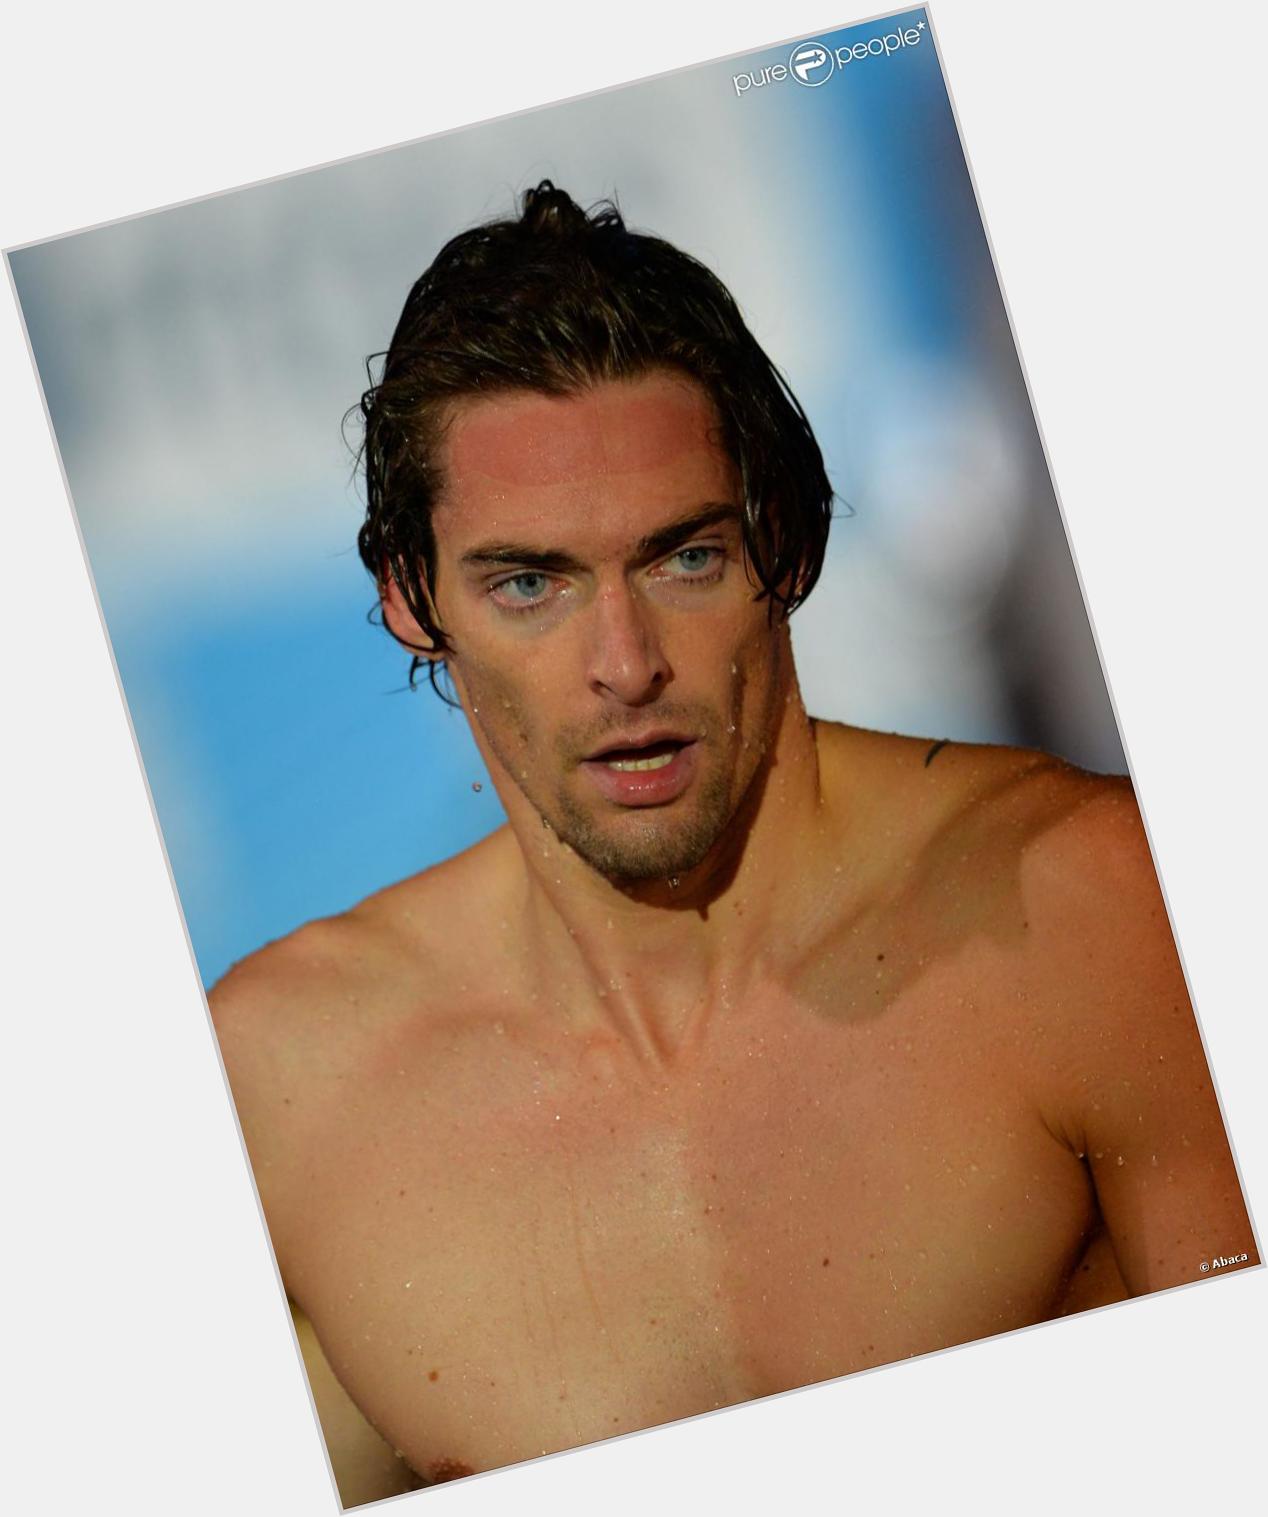 <a href="/hot-men/camille-lacourt/where-dating-news-photos">Camille Lacourt</a> Athletic body,  